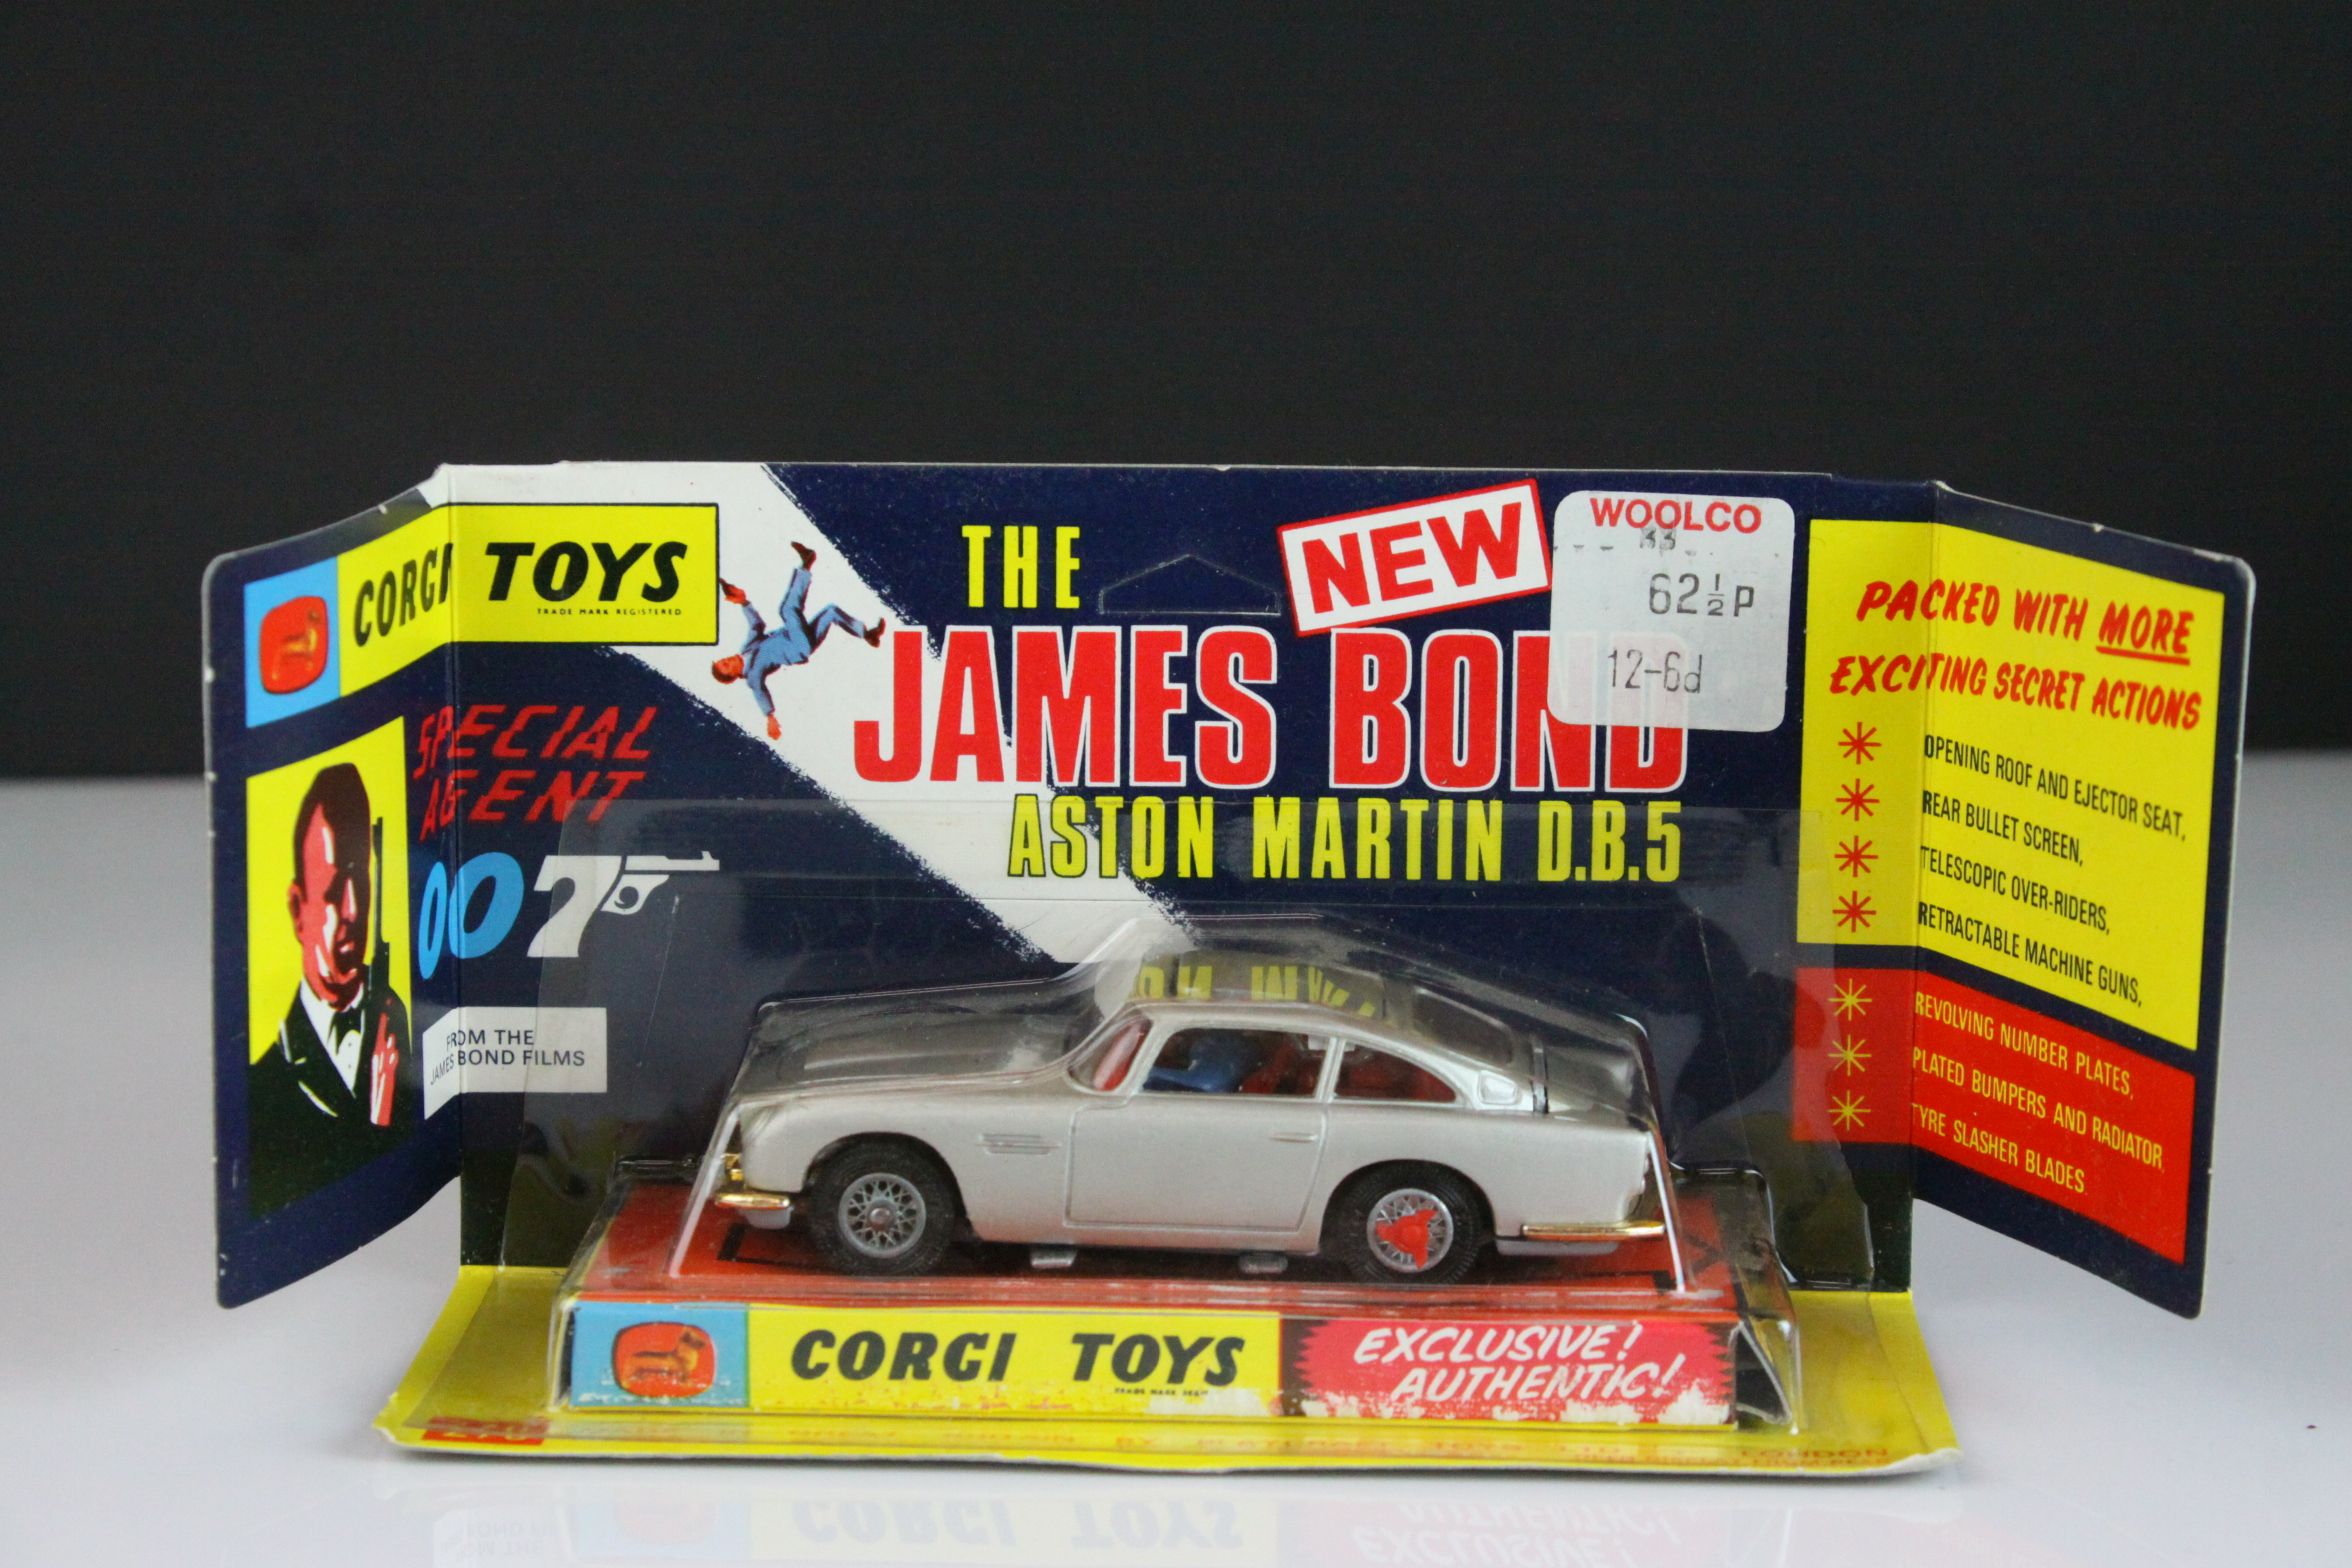 Boxed Corgi 270 The James Bond 007 Aston Martin diecast model appearing to be complete and unremoved